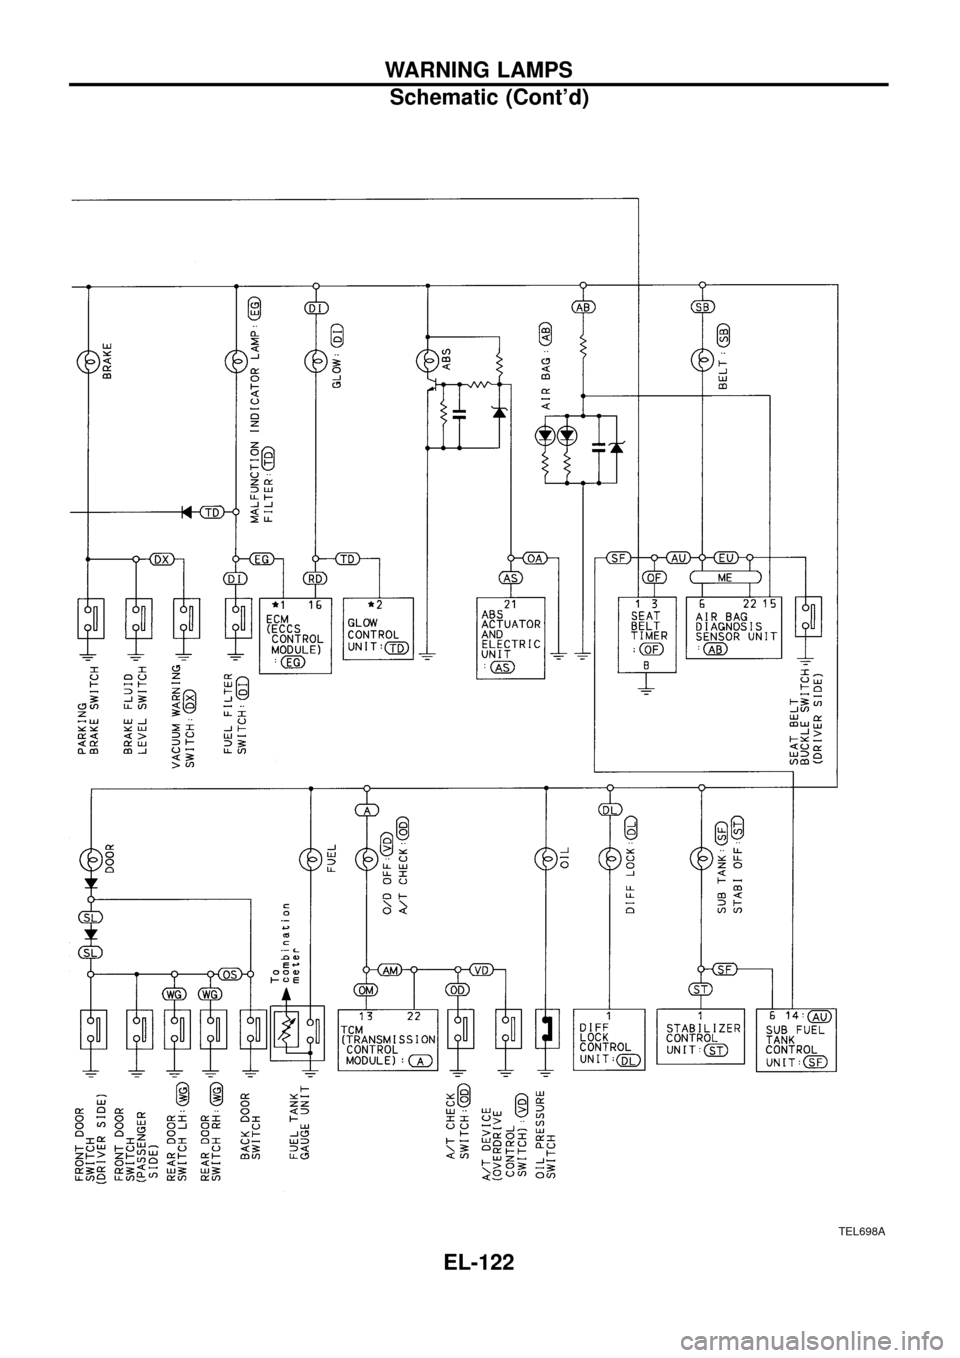 NISSAN PATROL 1998 Y61 / 5.G Electrical System User Guide TEL698A
WARNING LAMPS
Schematic (Contd)
EL-122 